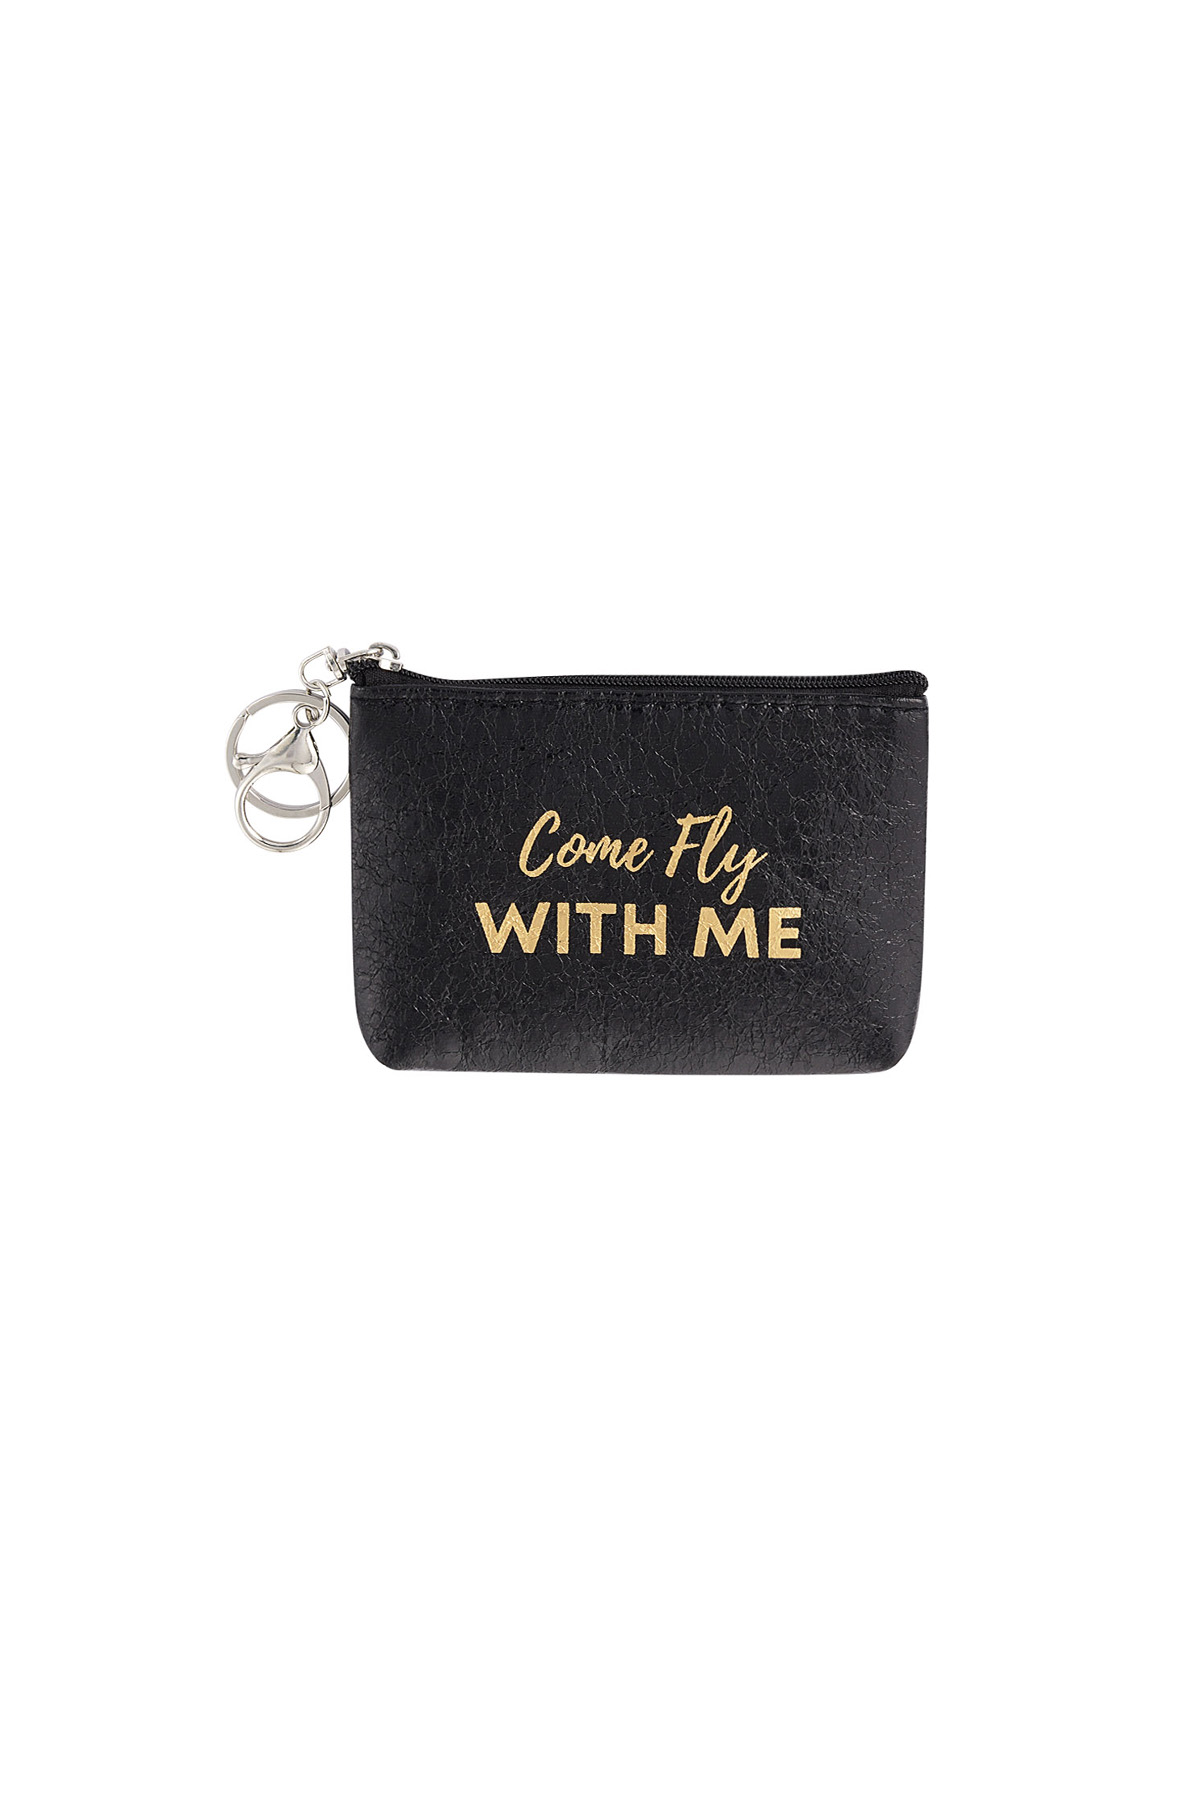 Keychain wallet metallic come fly with me - black 